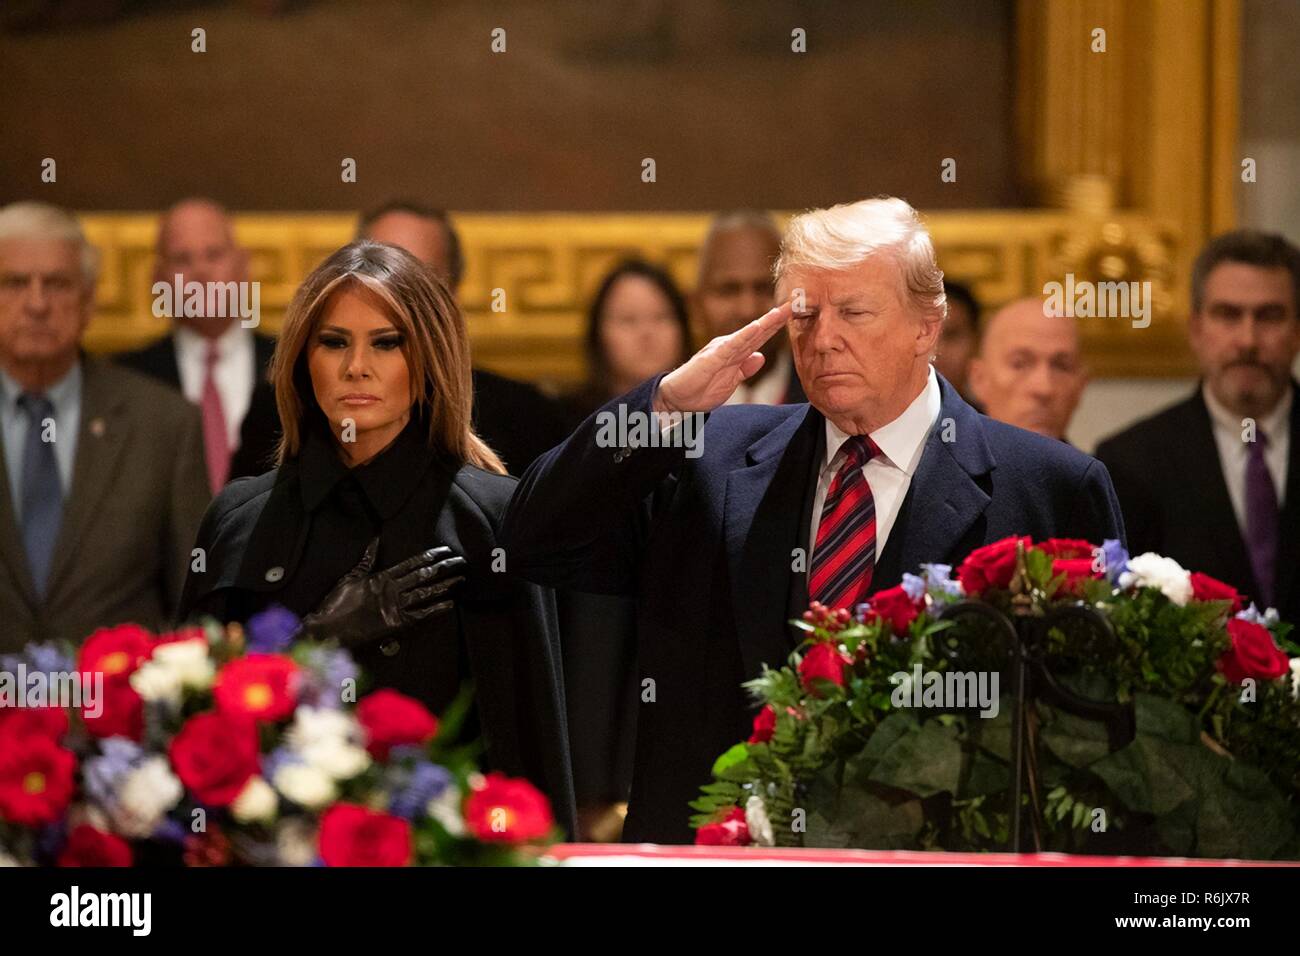 U.S President Donald Trump and First Lady Melania Trump salute as they pay respects to former President George H.W. Bush as they casket lays in state in the U.S. Capitol Rotunda December 3, 2018 in Washington, DC. Bush, the 41st President, died in his Houston home at age 94. Stock Photo